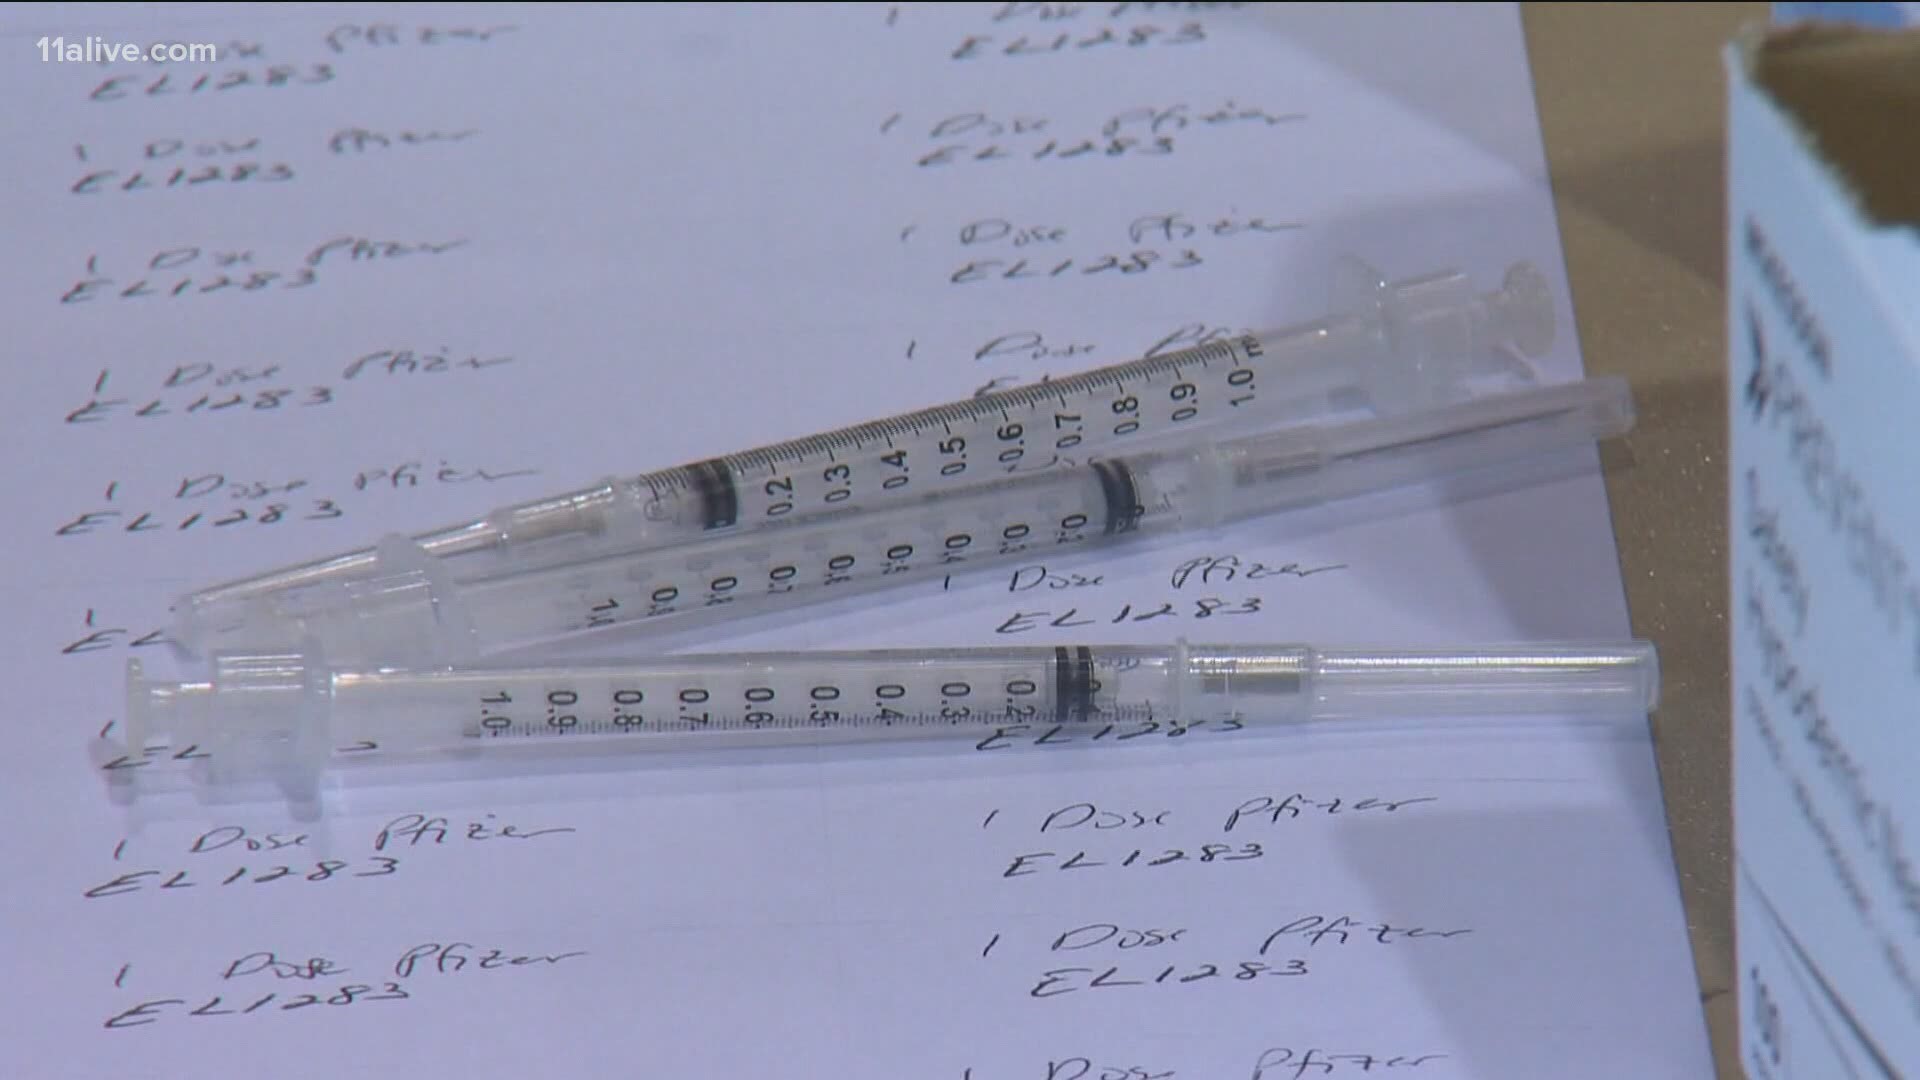 Dr. Cecil Bennett in Newnan has been stressing the importance of authorizing primary care providers to administer vaccines and getting them supplies.